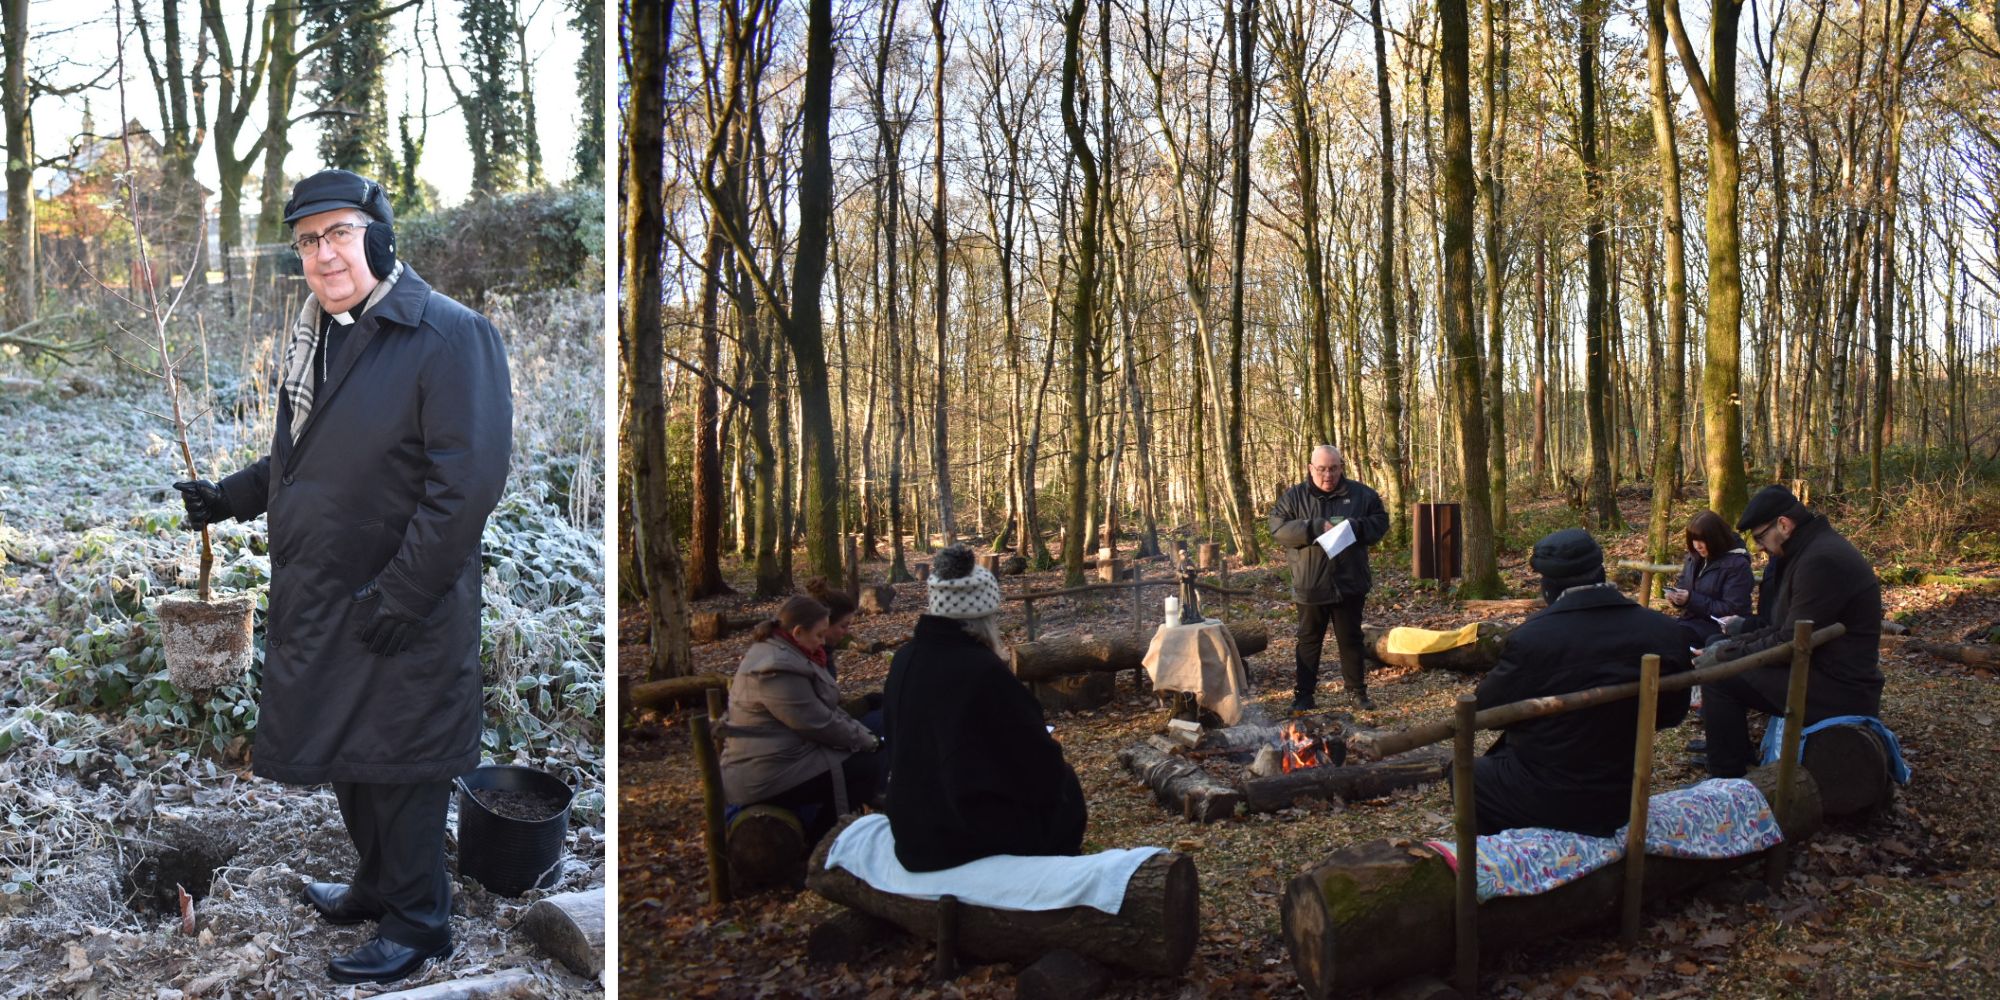 Two photos showing Nuncio's visit to the Laudato Si' Centre: Photo 1 shows the Nuncio holding the apple tree about to be planted. Photo 2 shows the group sitting around the fire as Deacon John stood to give a reflection